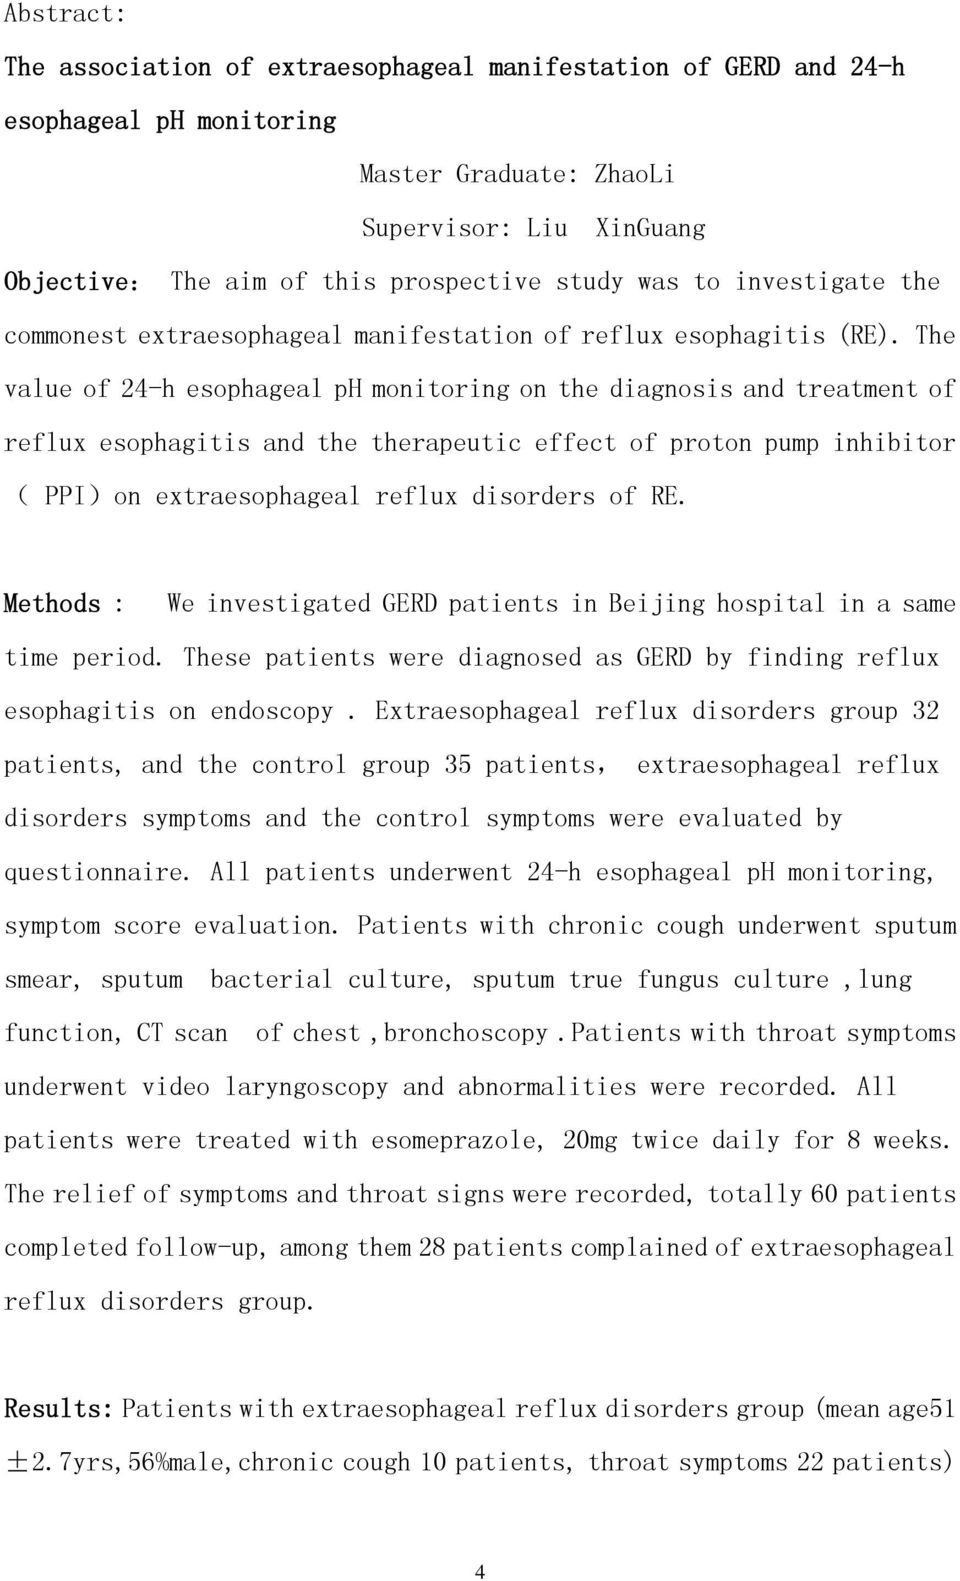 The value of 24-h esophageal ph monitoring on the diagnosis and treatment of reflux esophagitis and the therapeutic effect of proton pump inhibitor ( PPI)on extraesophageal reflux disorders of RE.